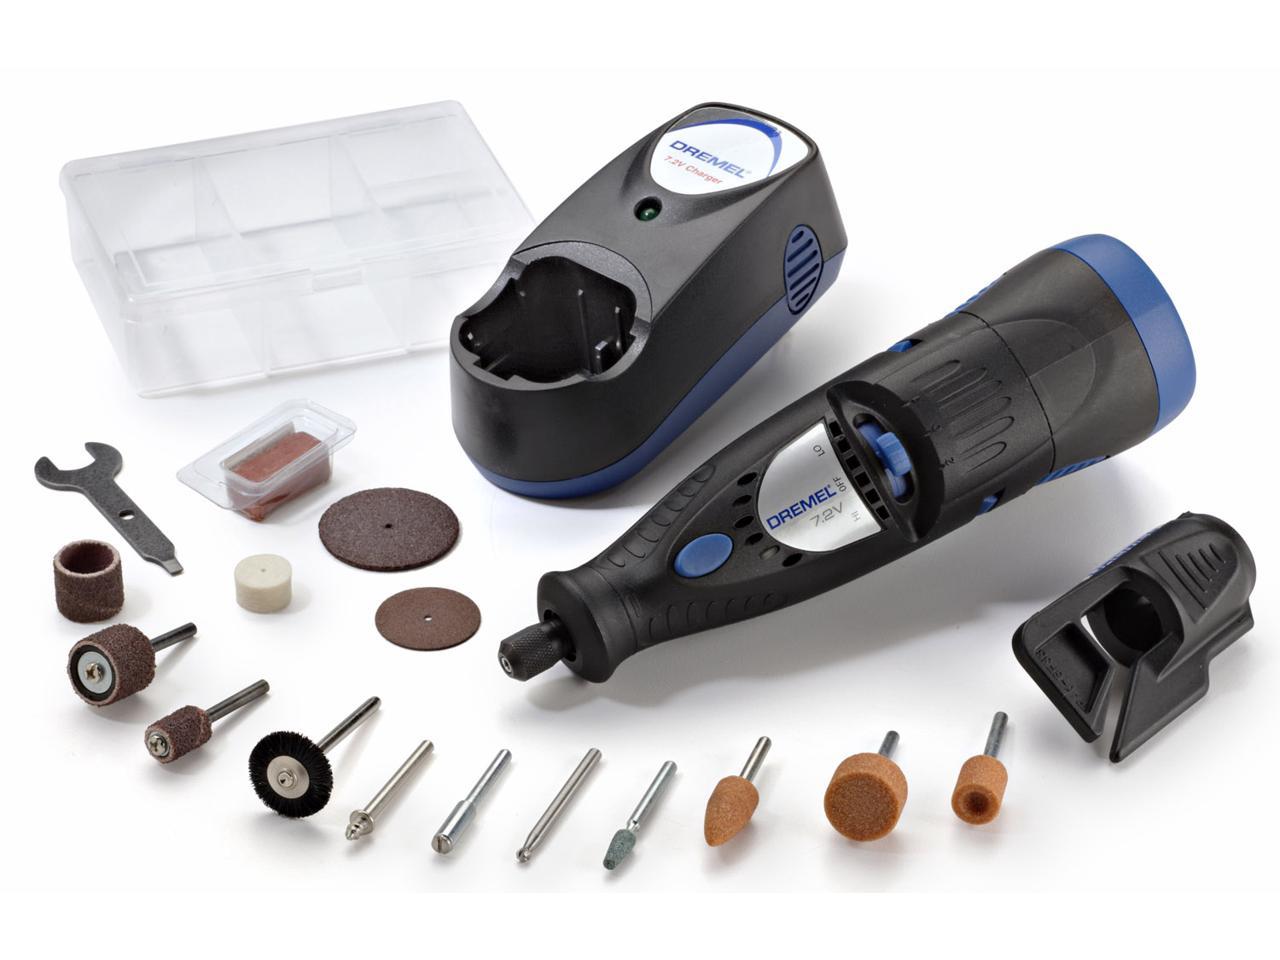 Dremel 7700-1/15 7.2 V MultiPro Cordless With 15 Accessories Newegg.com